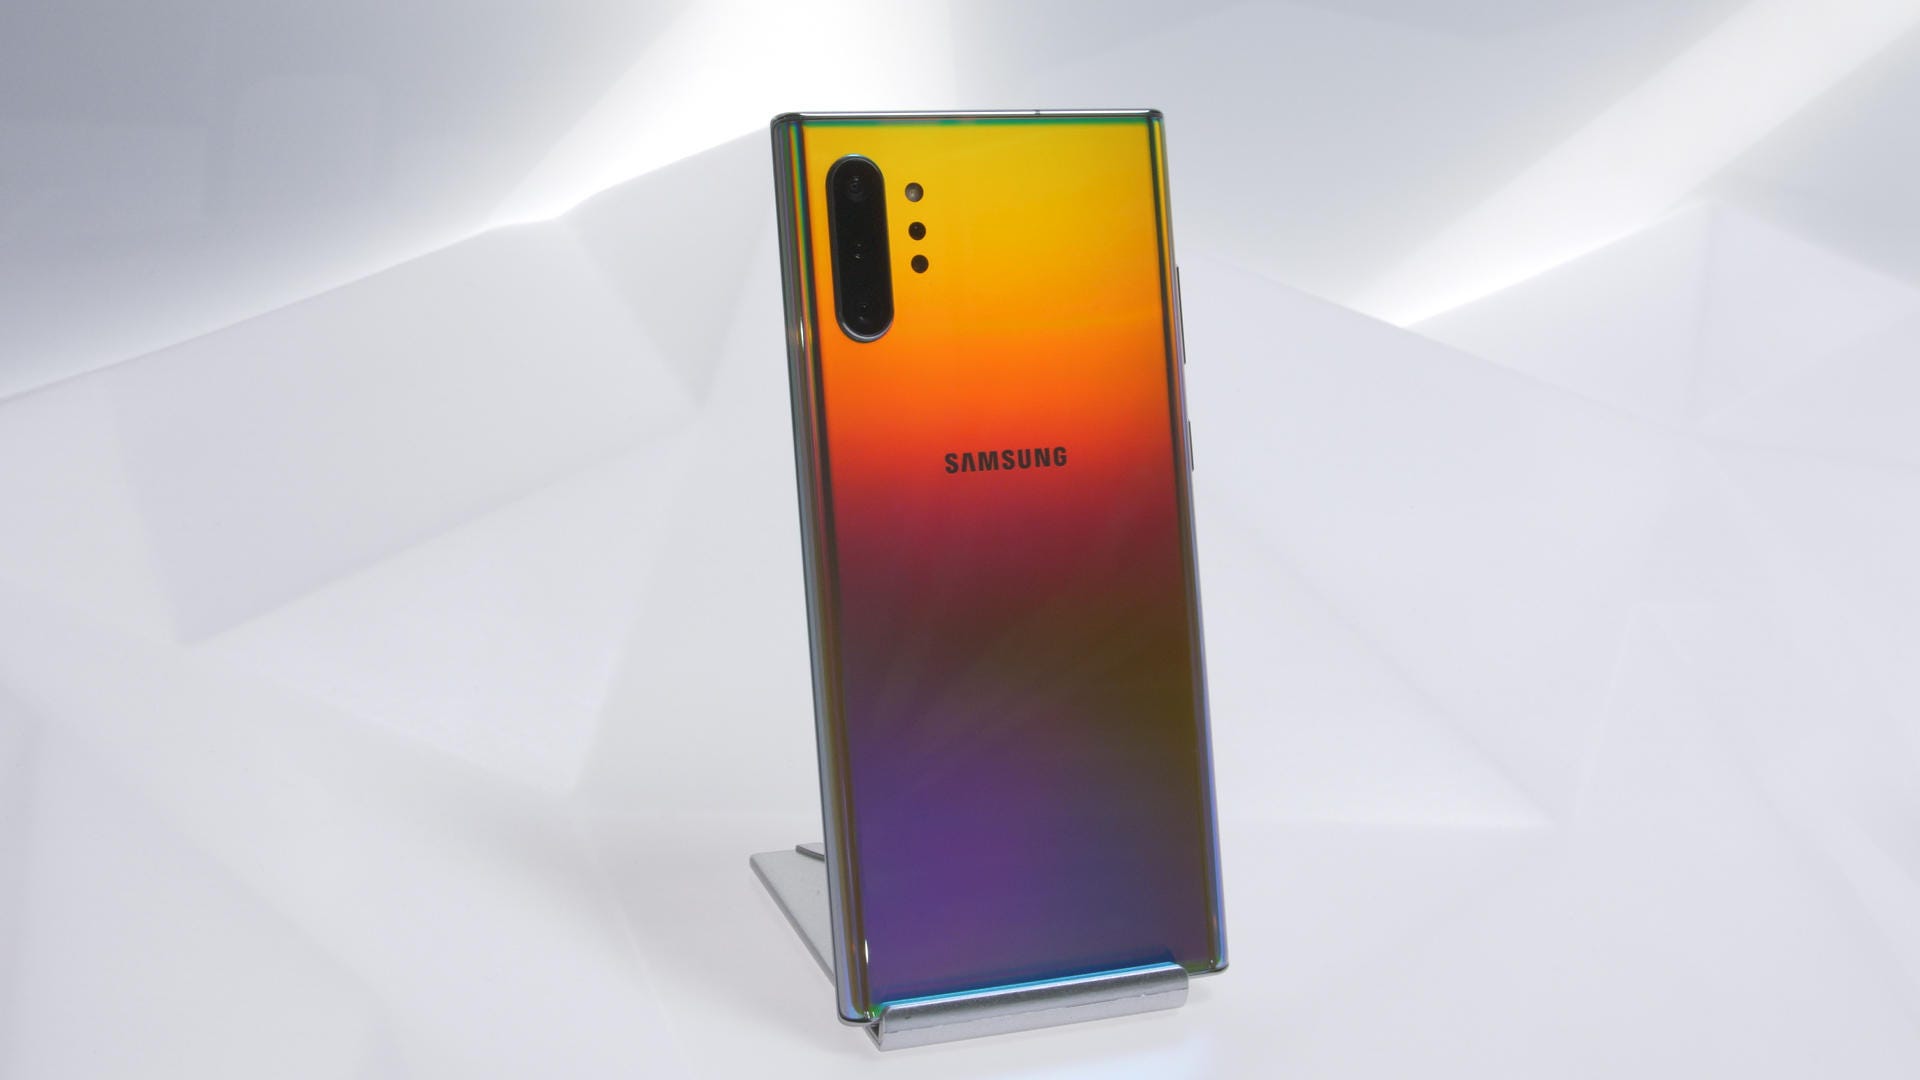 Galaxy Note 10 and Note 10 Plus look incredible - CNET